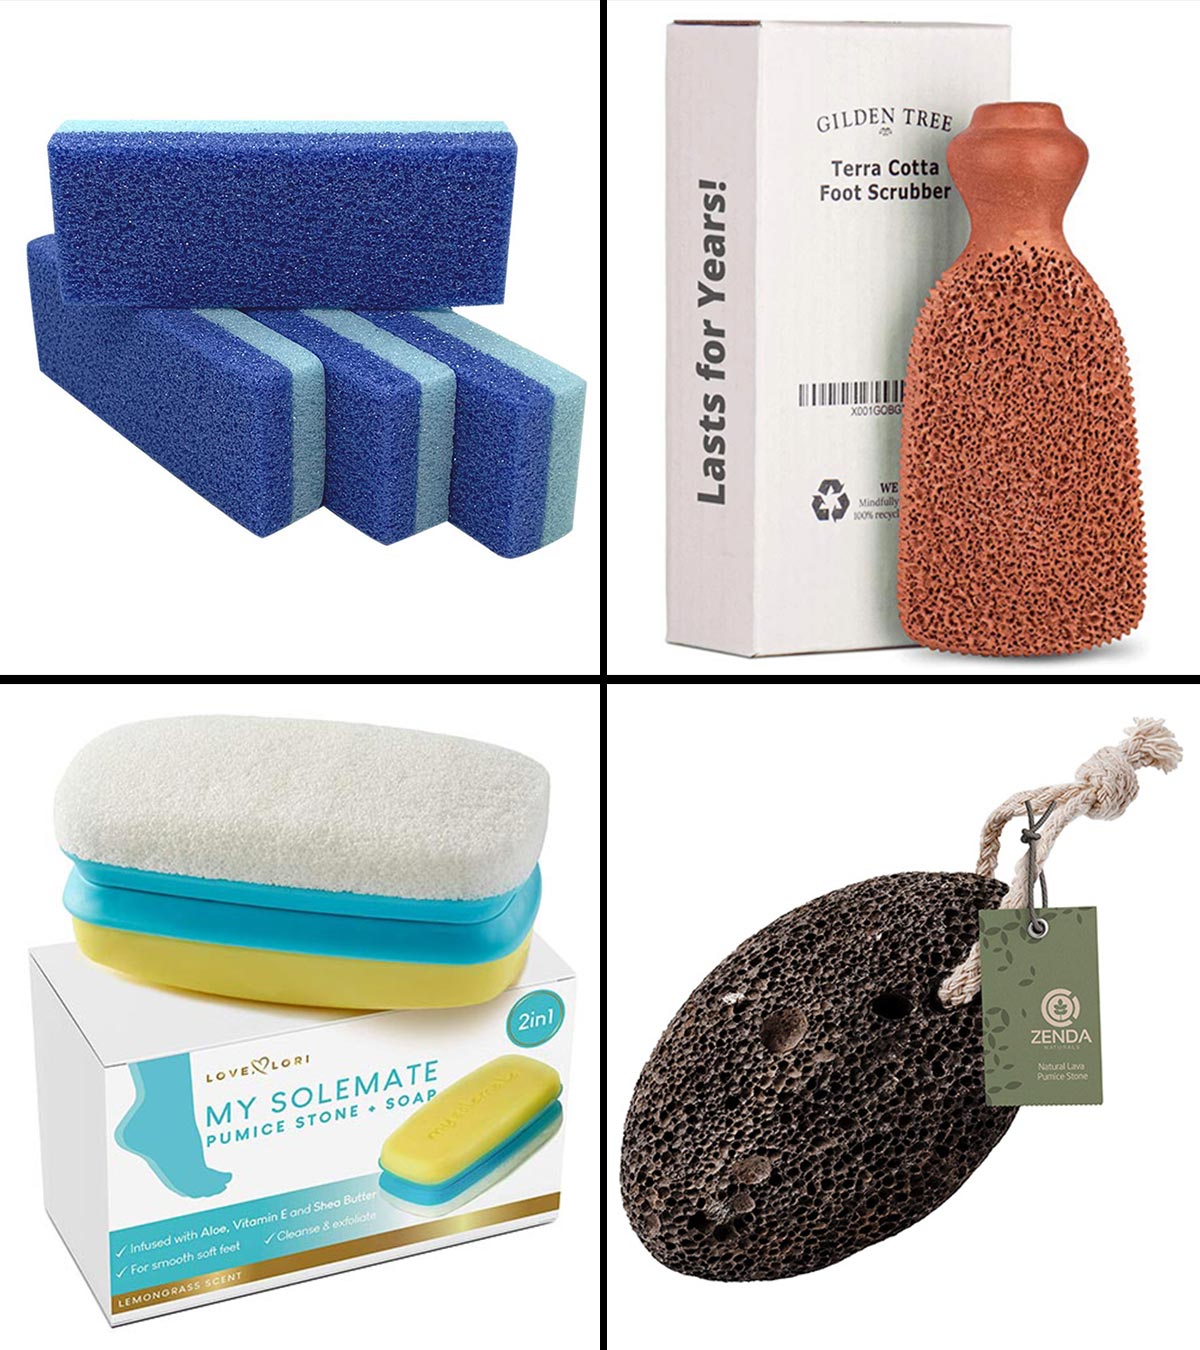 How To Clean A Pumice Stone Using 2 Ingredients - Frugally Blonde